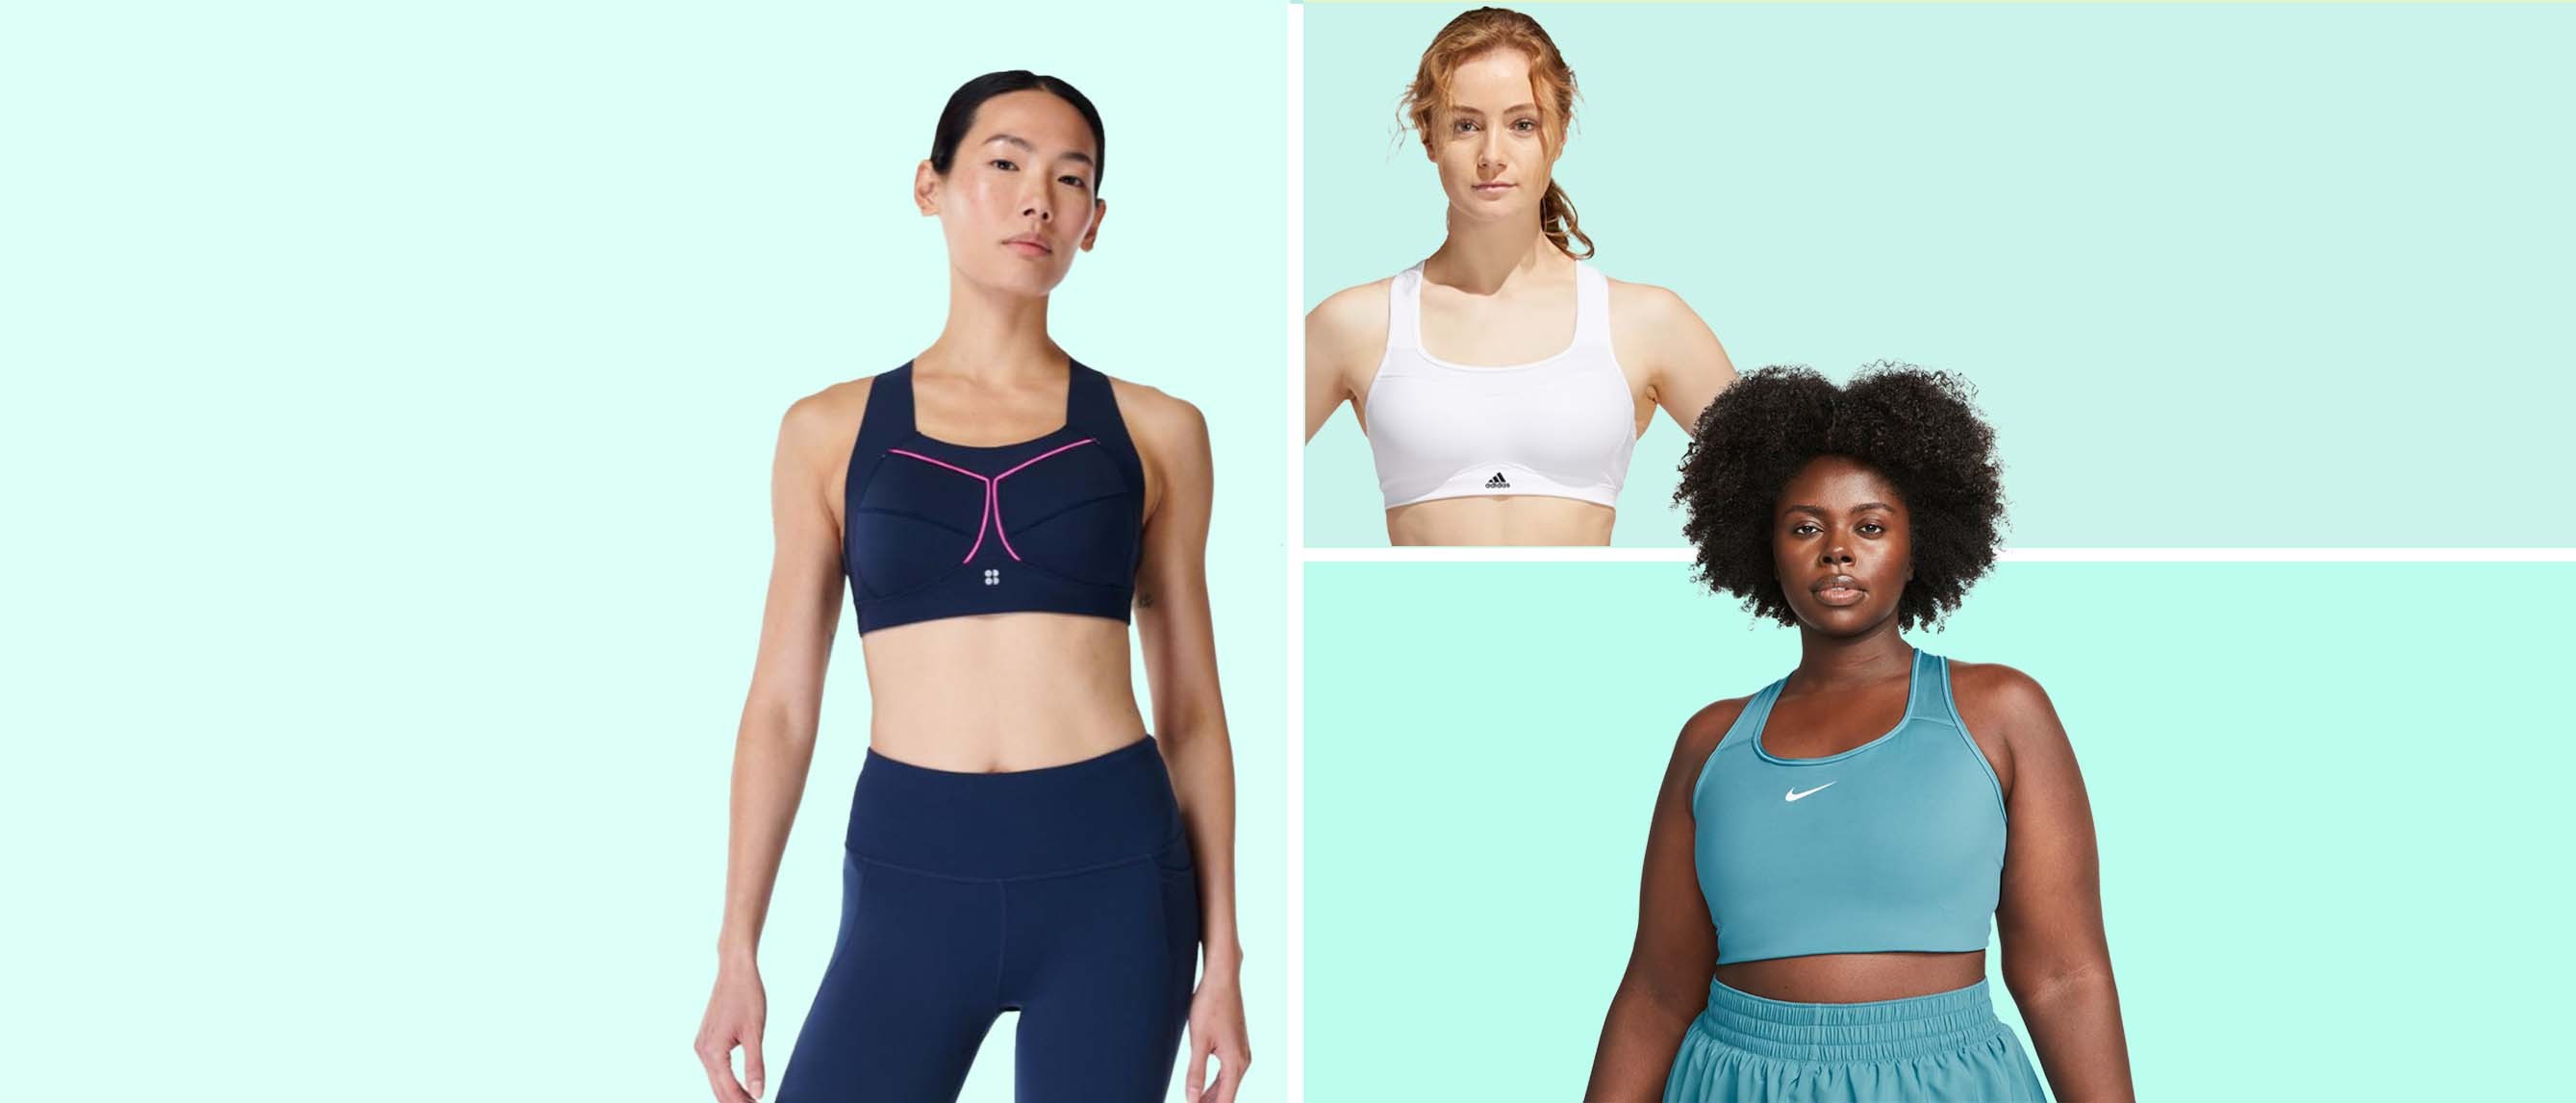 Best, most stylish and supportive sports bras every woman needs